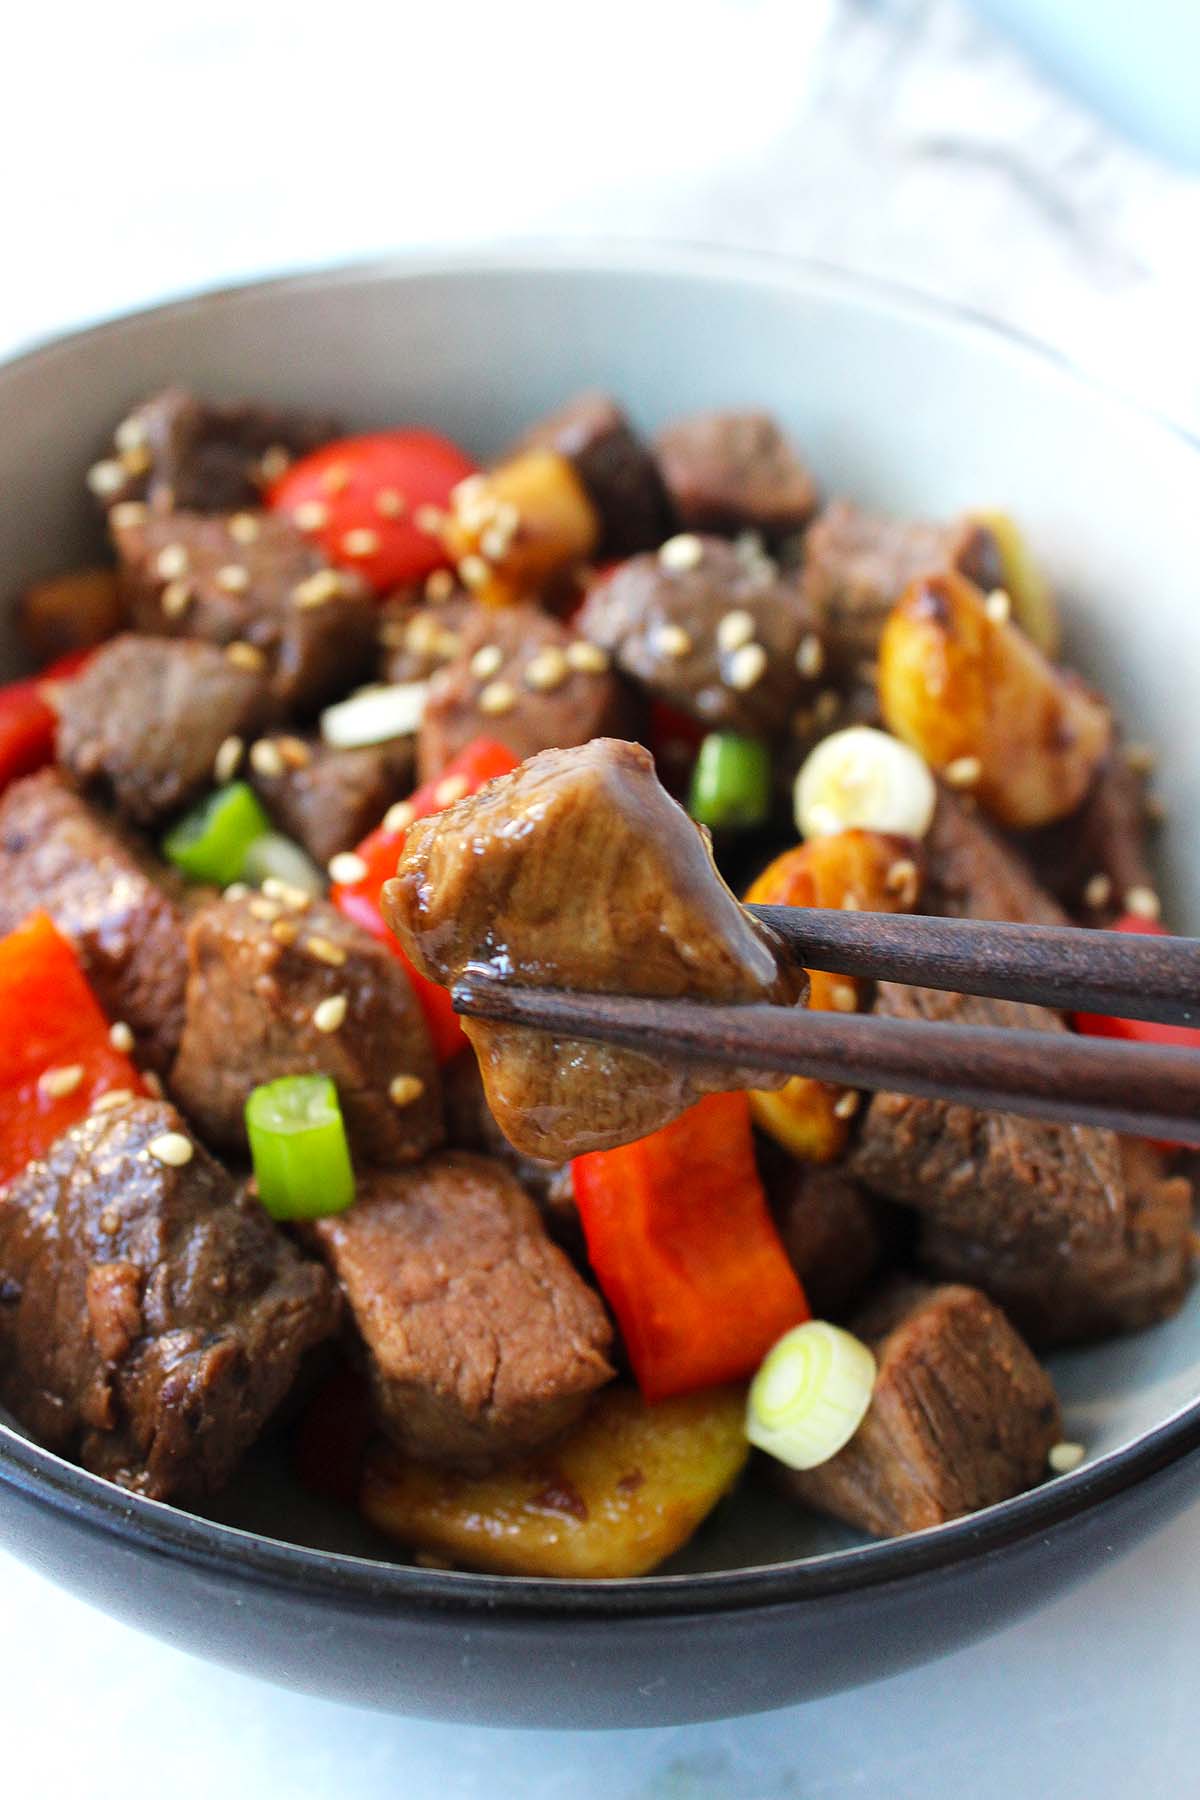 Garlic and beef stri fry